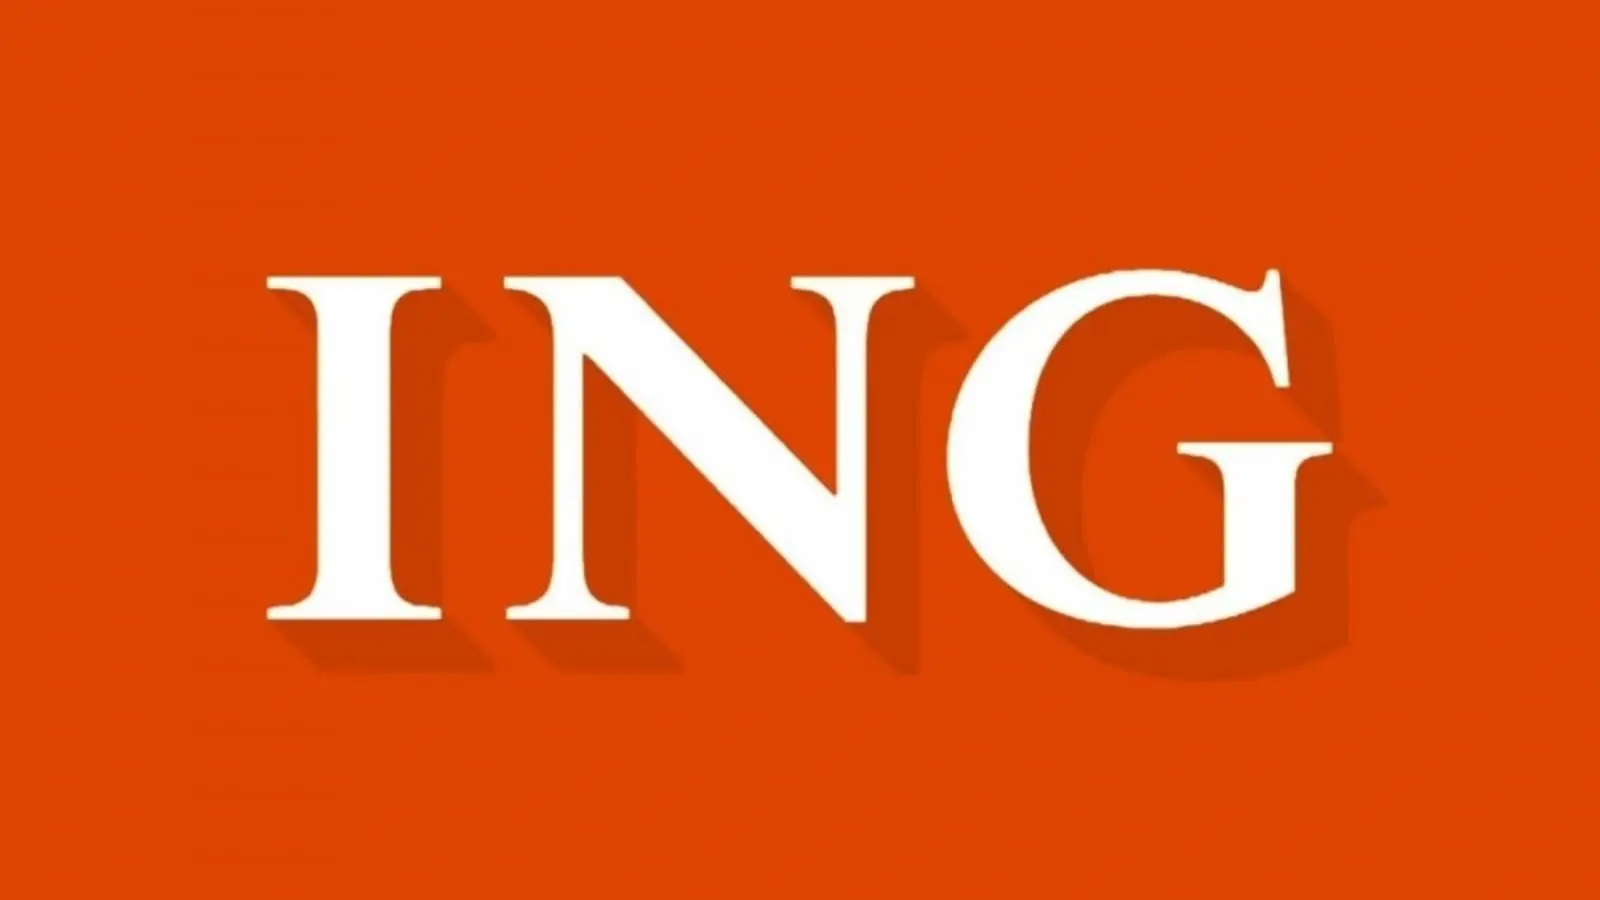 ING Bank gives its customers free MacBooks, iPad tablets, how you can win them